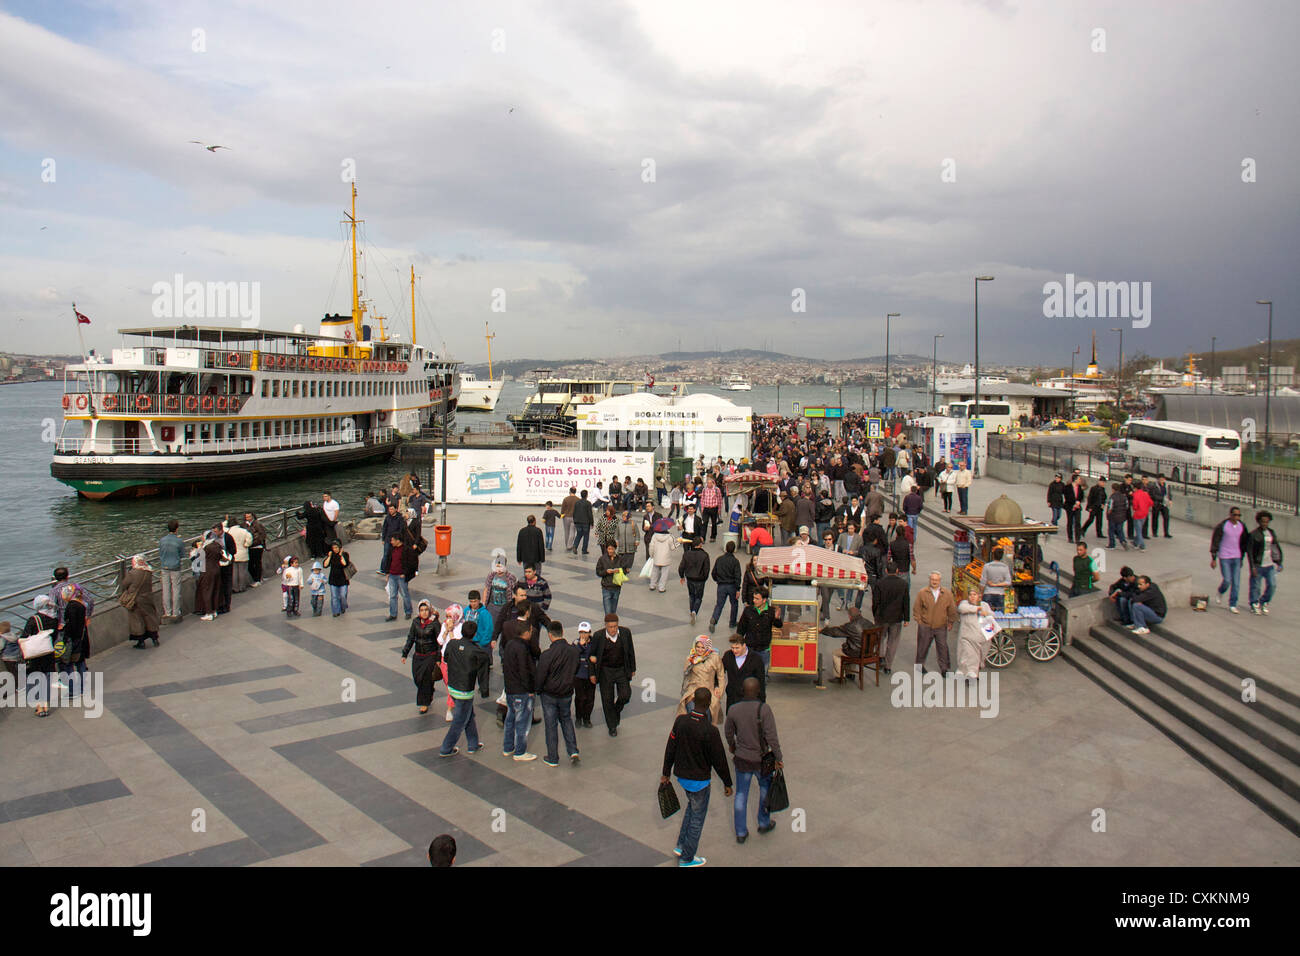 People on the quay and ferries, Eminoenue district, Istanbul, Turkey, Europe Stock Photo